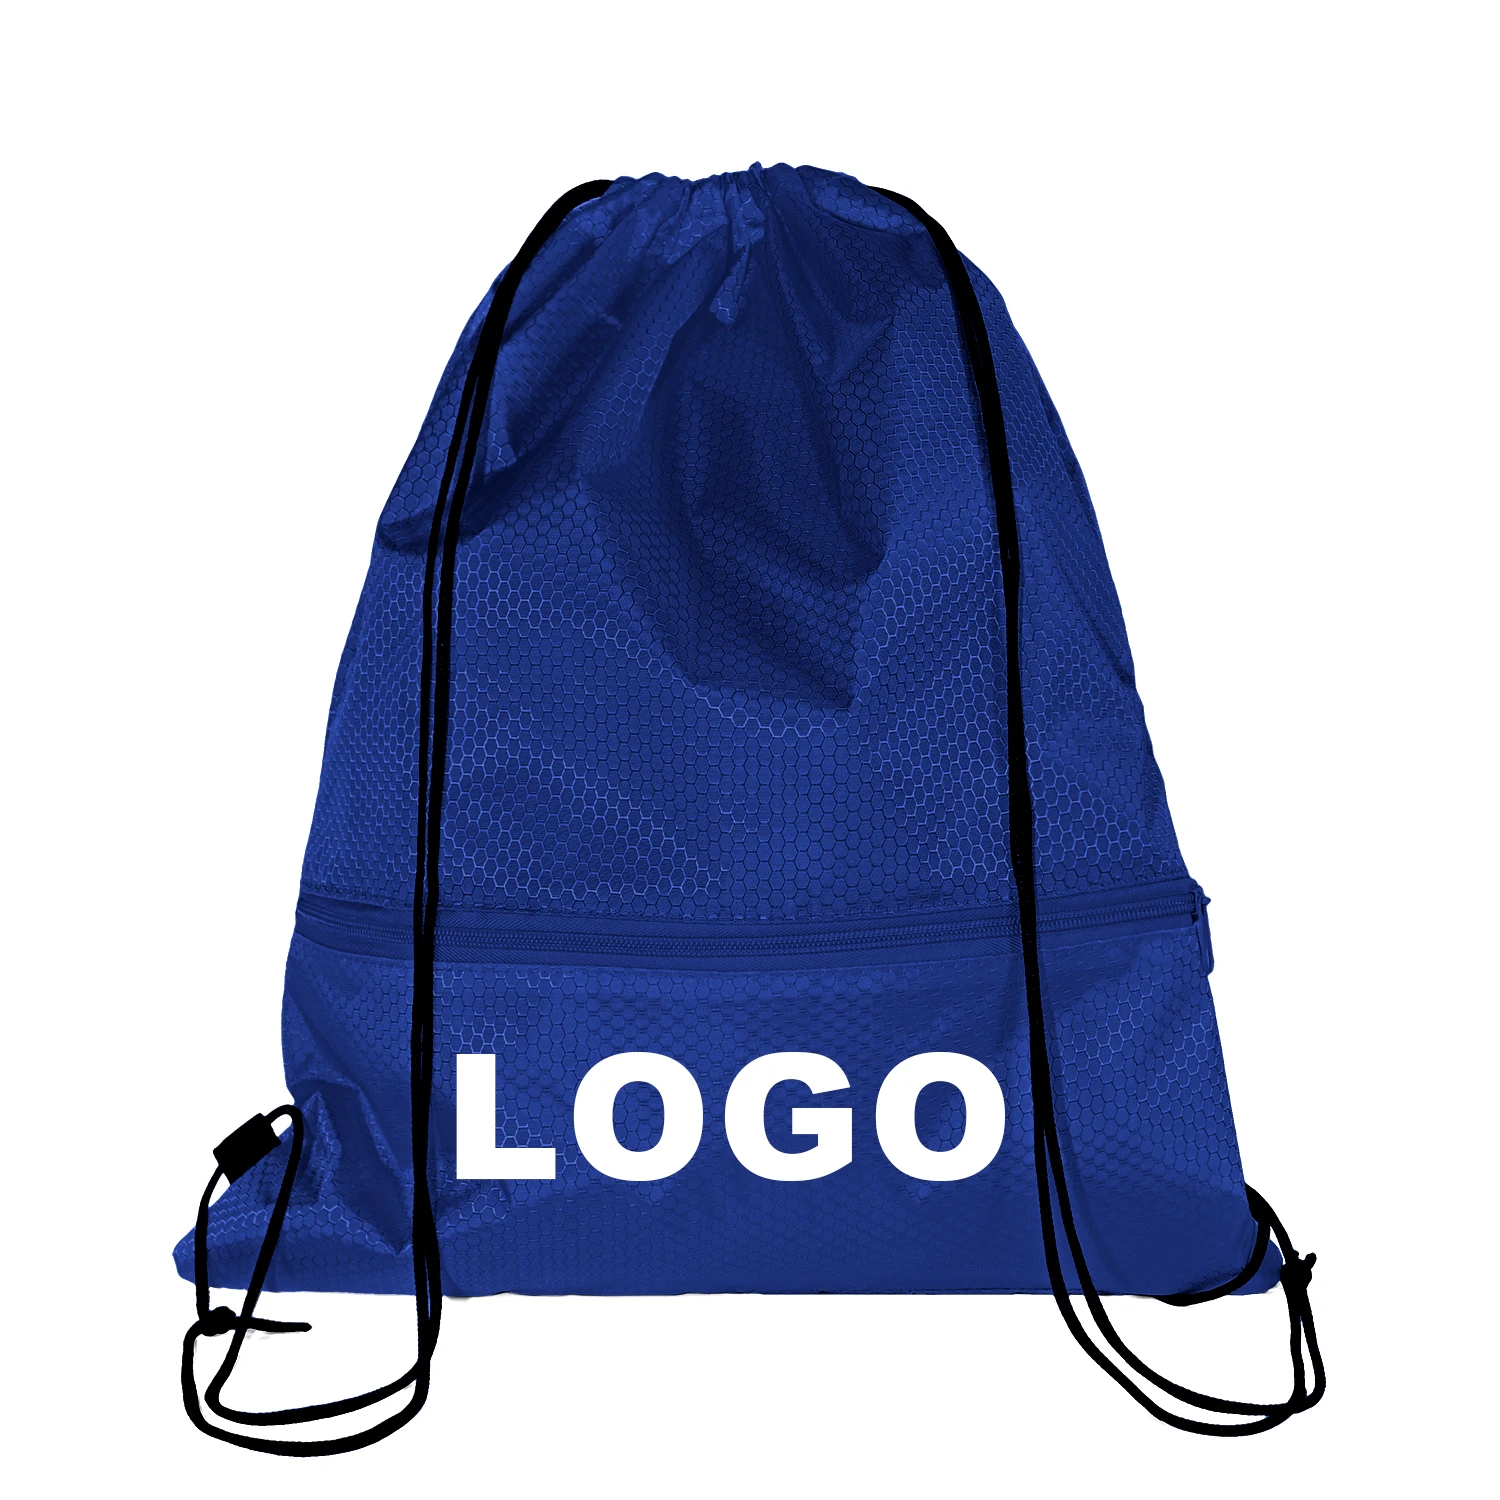 Personalized Gym Backpack Custom Name Kids Drawstring Swimming Bag Sports Bag Birthday Party Gifts